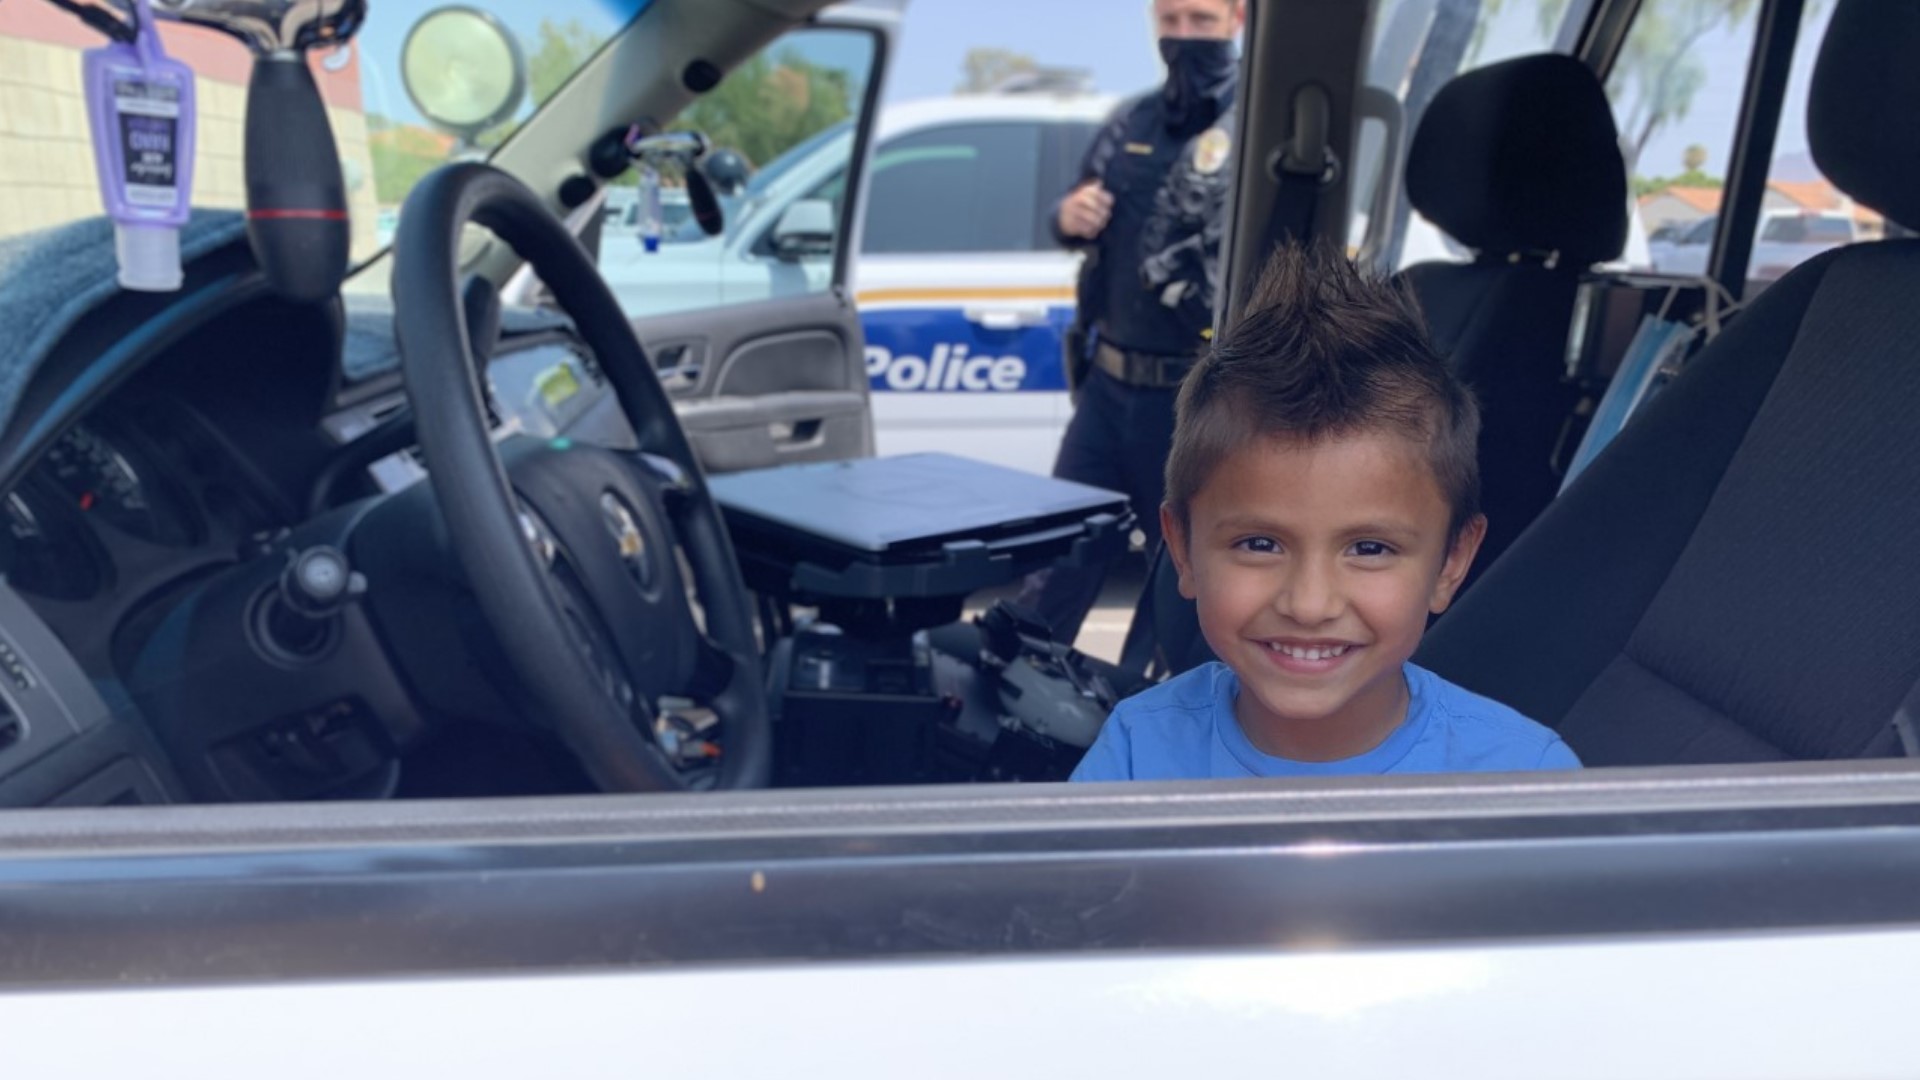 Ravi’s not just a kid with a cool haircut, he’s a 4-year-old doing cool deeds. With the help of friends, Ravi raised $200 to buy lunch for the Phoenix Police Dept.